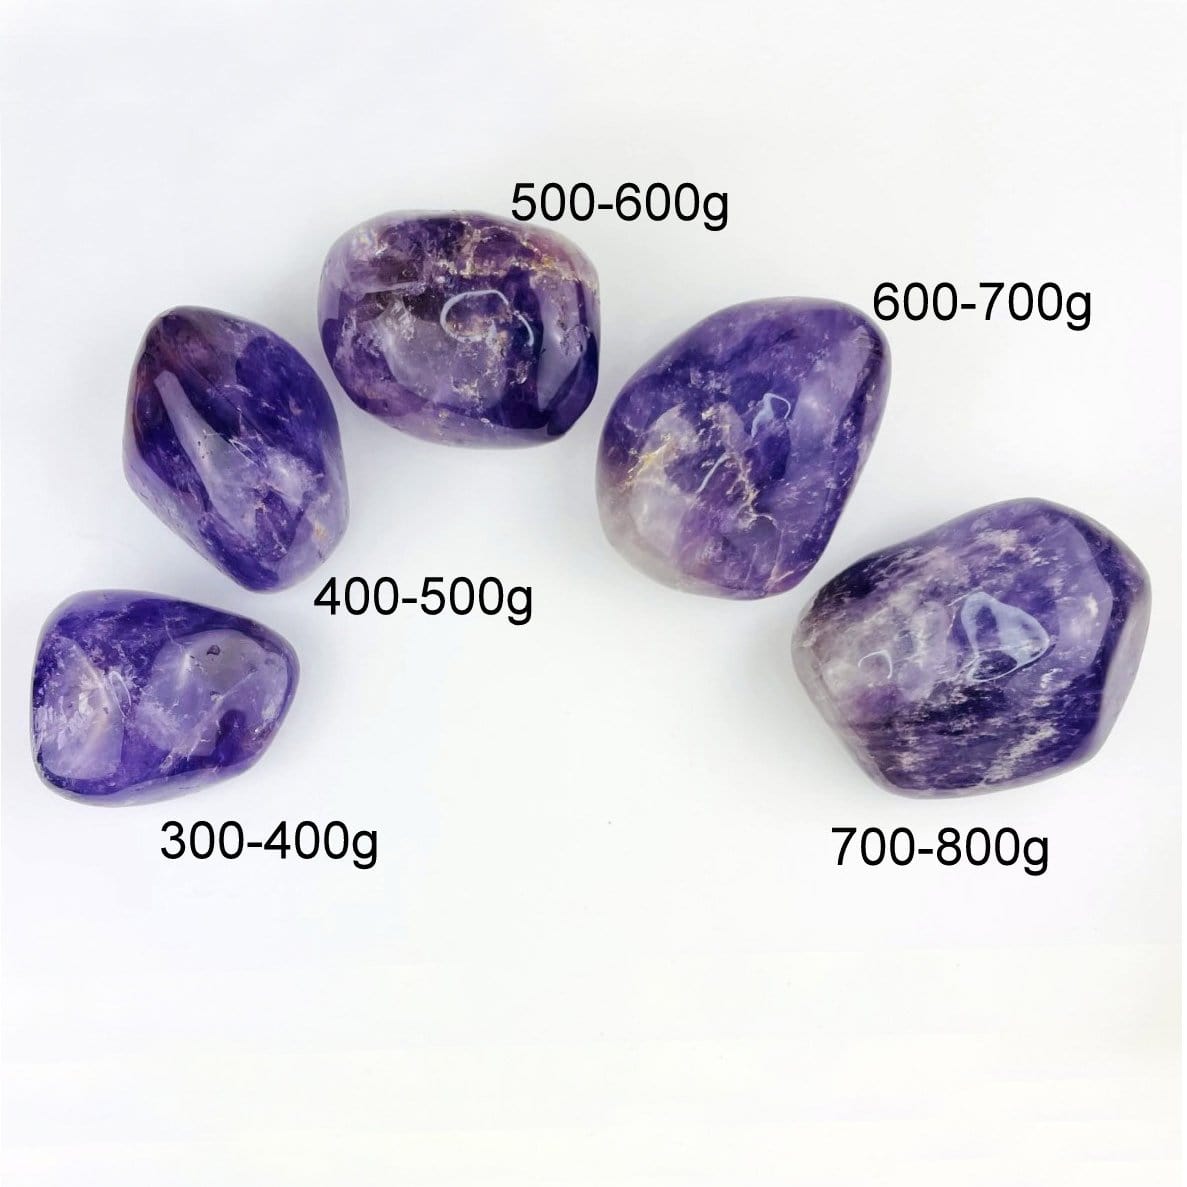 5 different sized amethyst tumbled stones on white background